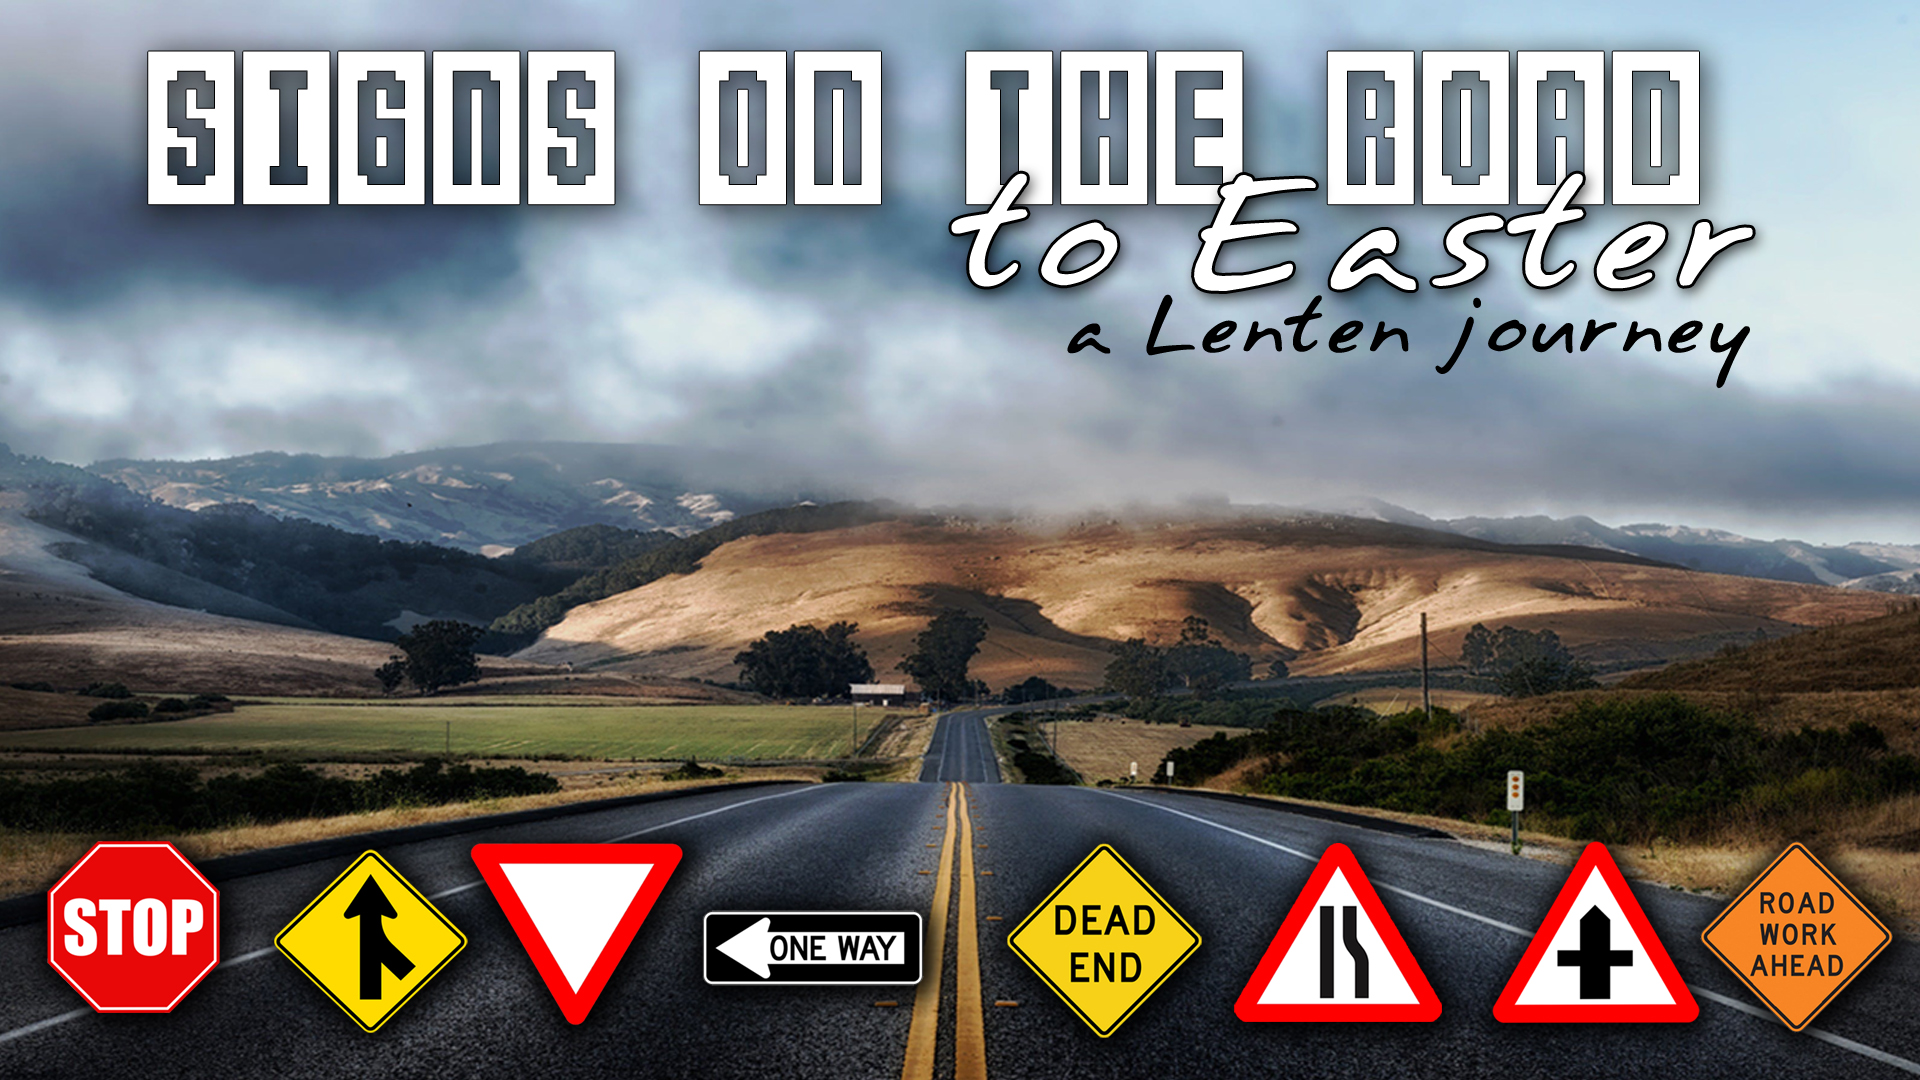 Signs on the road to Easter: Road work ahead